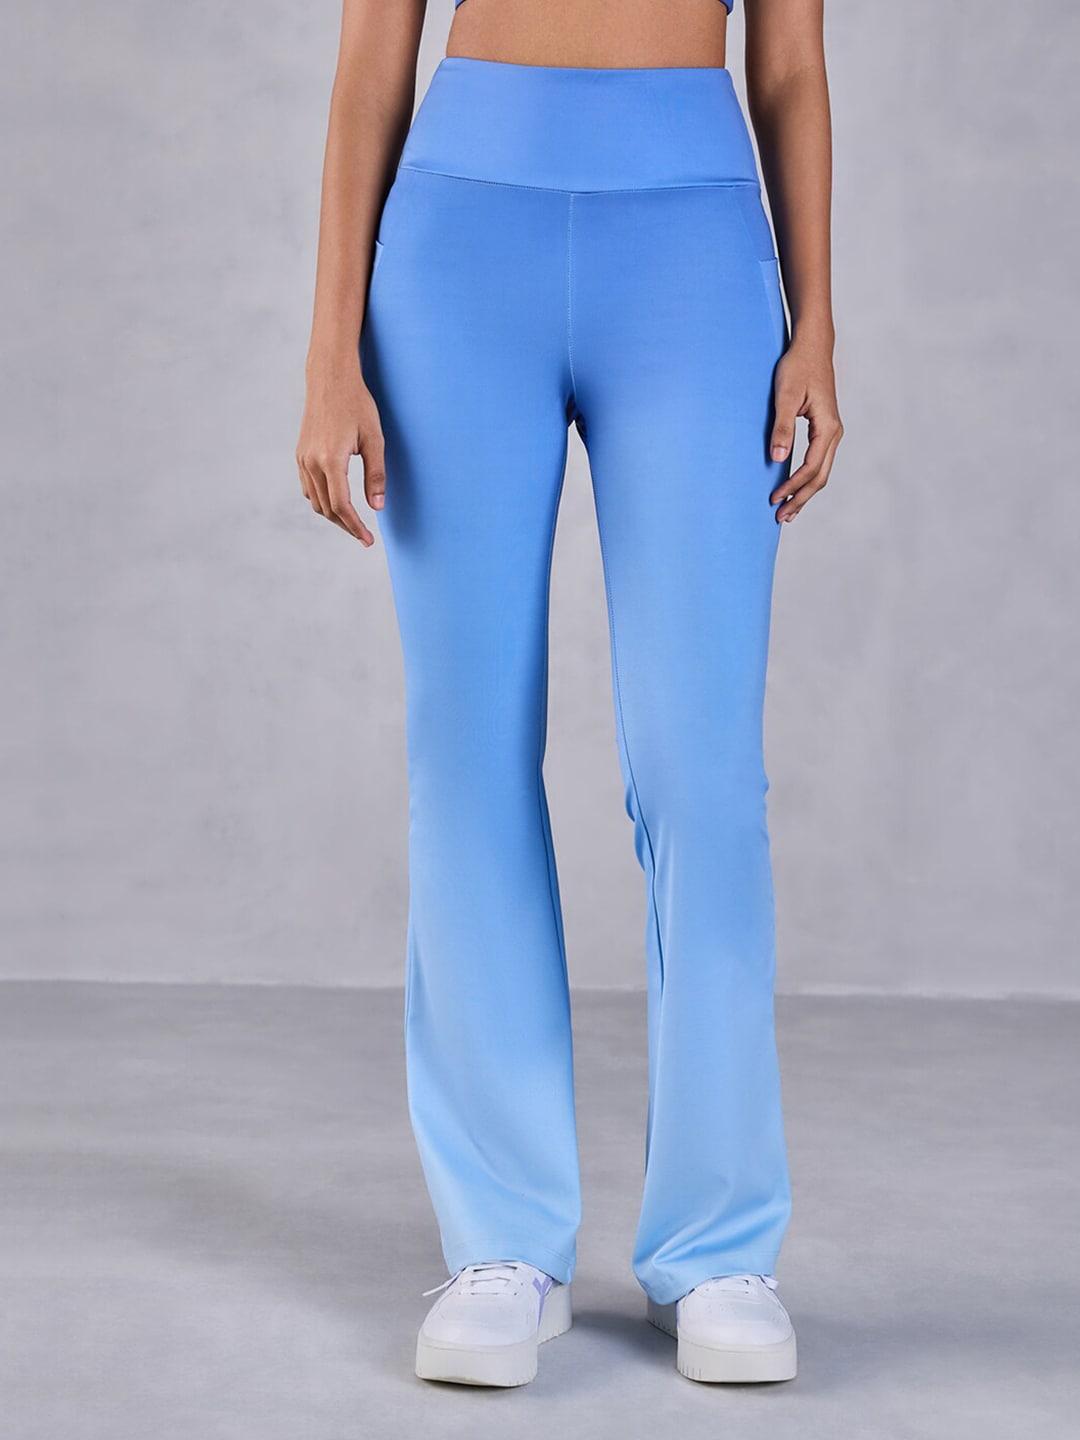 KICA Winter Collection Women High-Rise Ombre Flare Track Pants